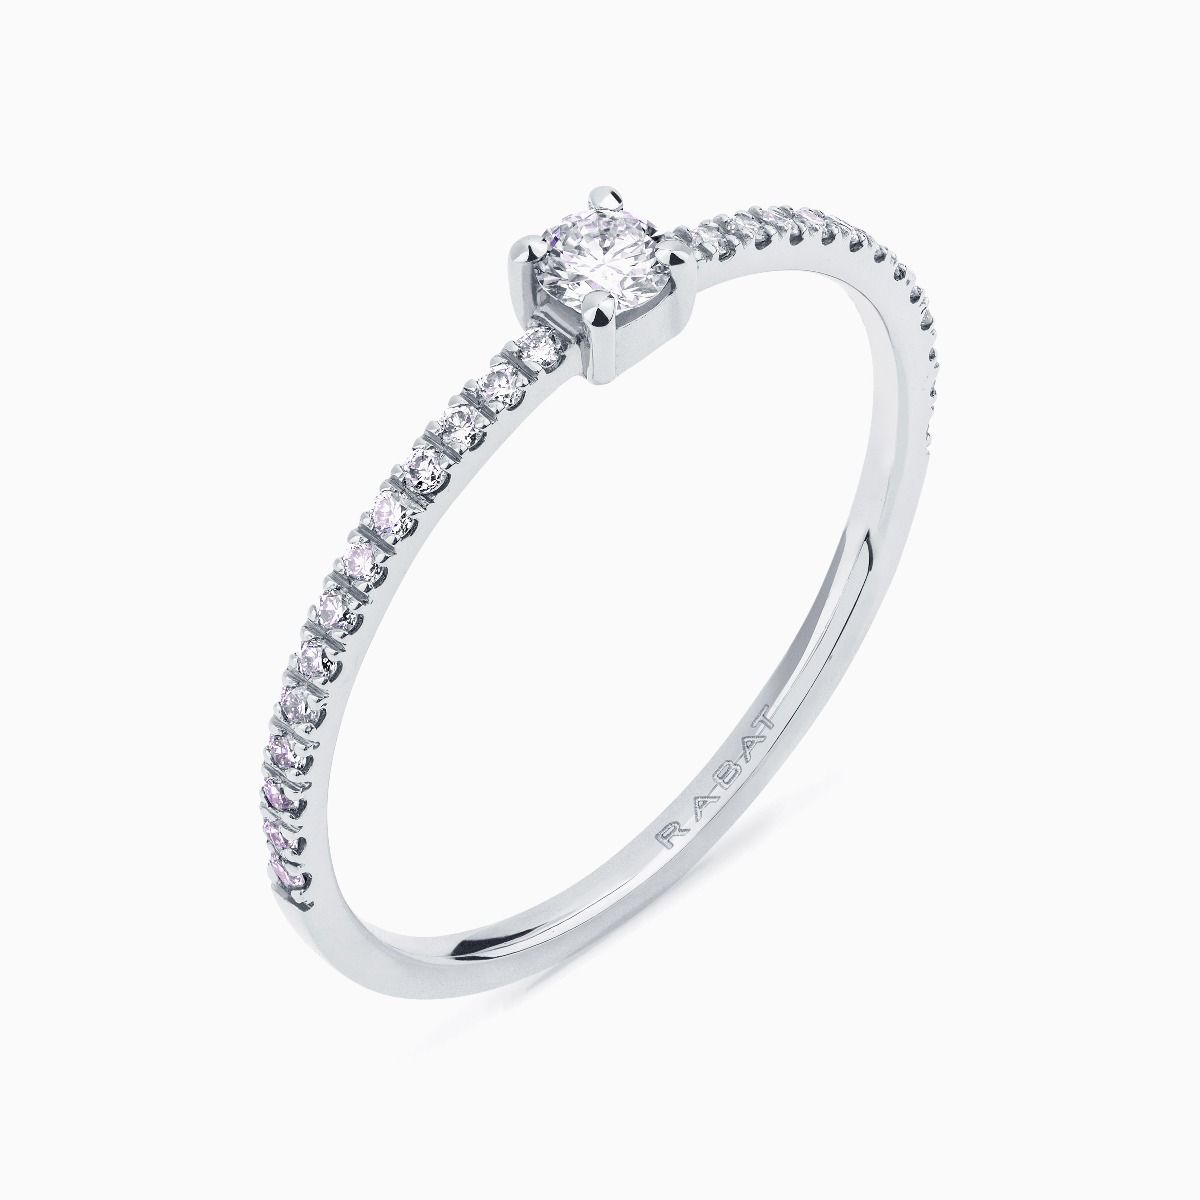 Poetic Thin solitaire engagement ring with diamonds pavé